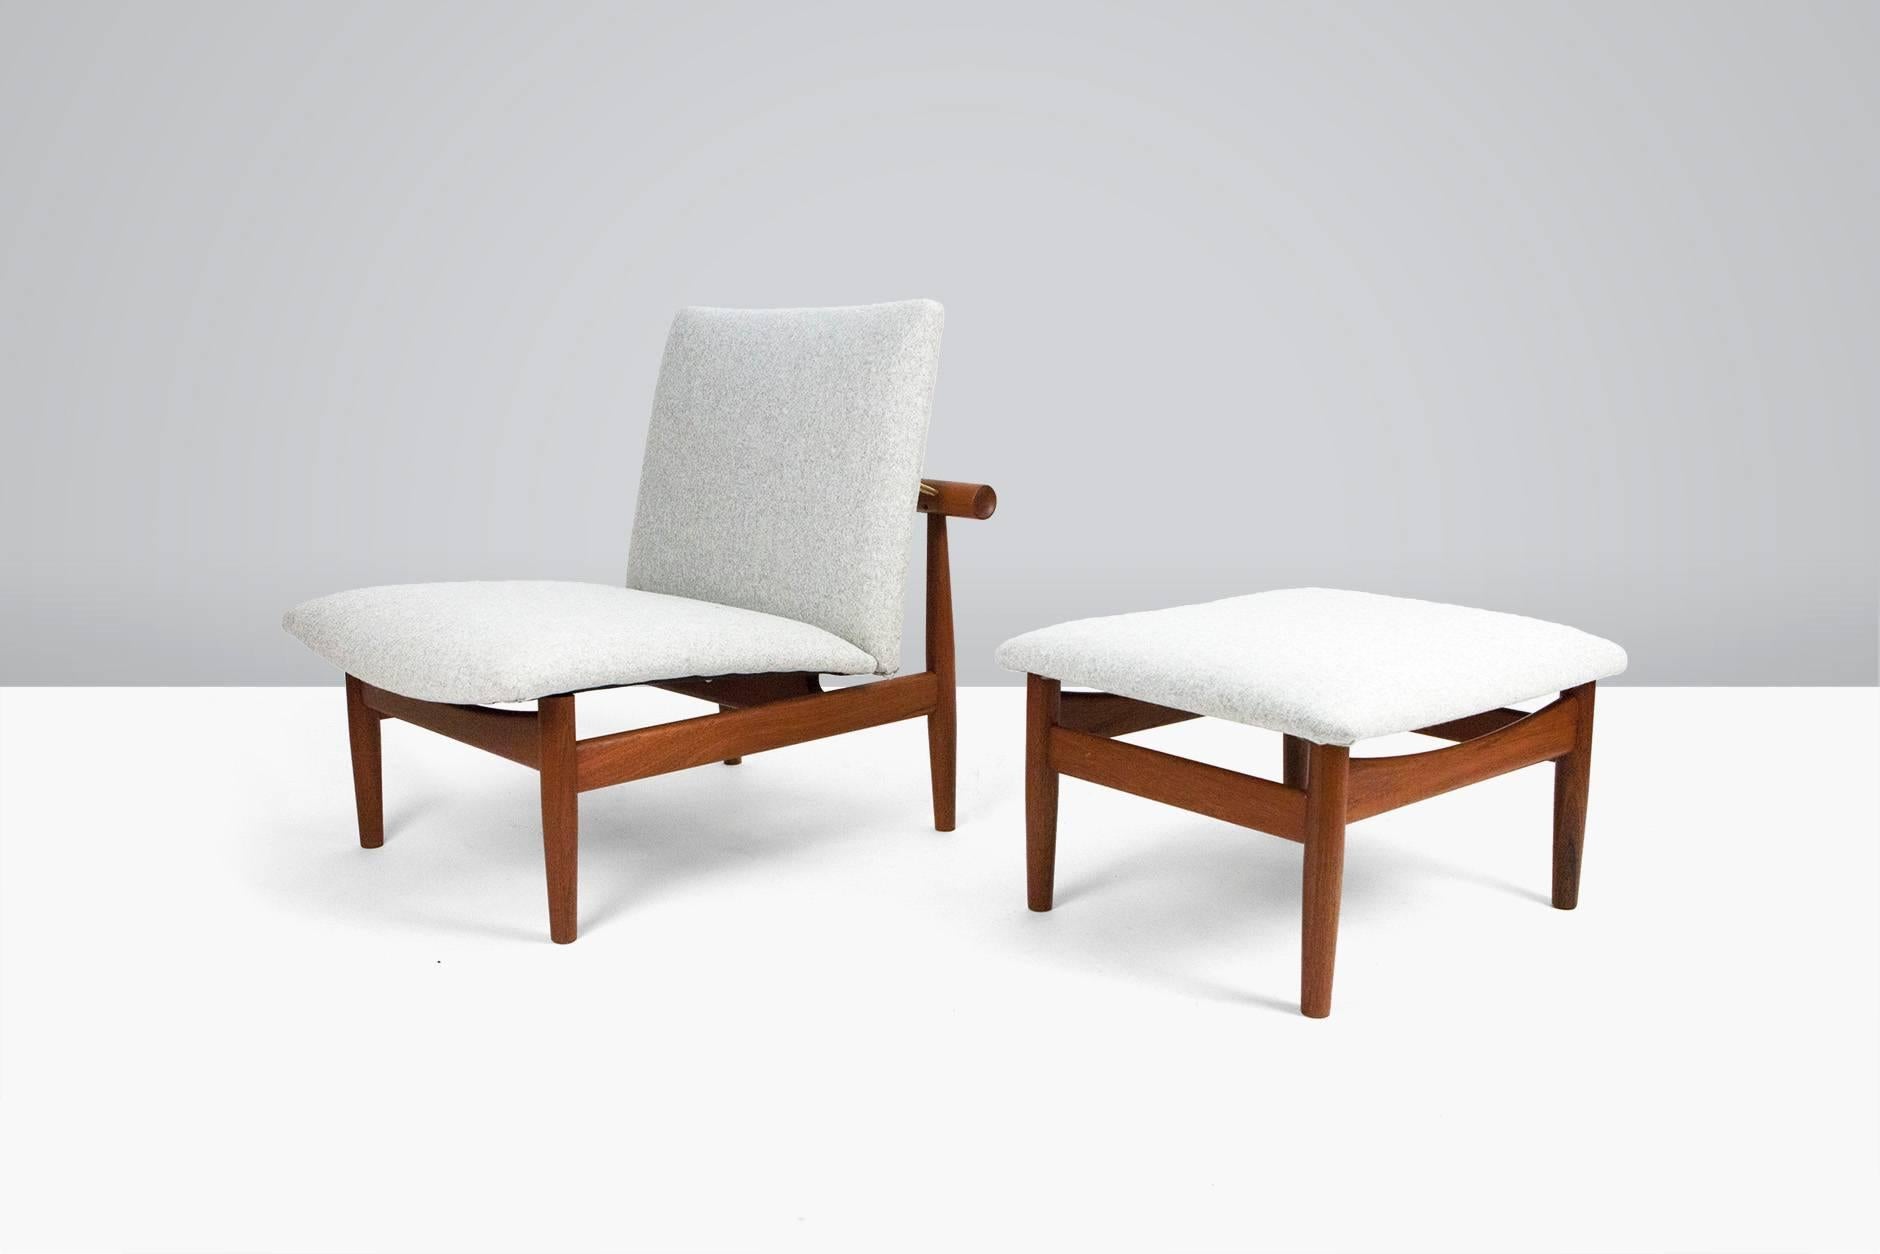 Produced by France and Son, Denmark. Solid teak frame, exposed brass fittings. Seat and back pad reupholstered in Kvadrat Divina wool fabric. Highly sought after model inspired by the Miajima water gate near Hiroshima.